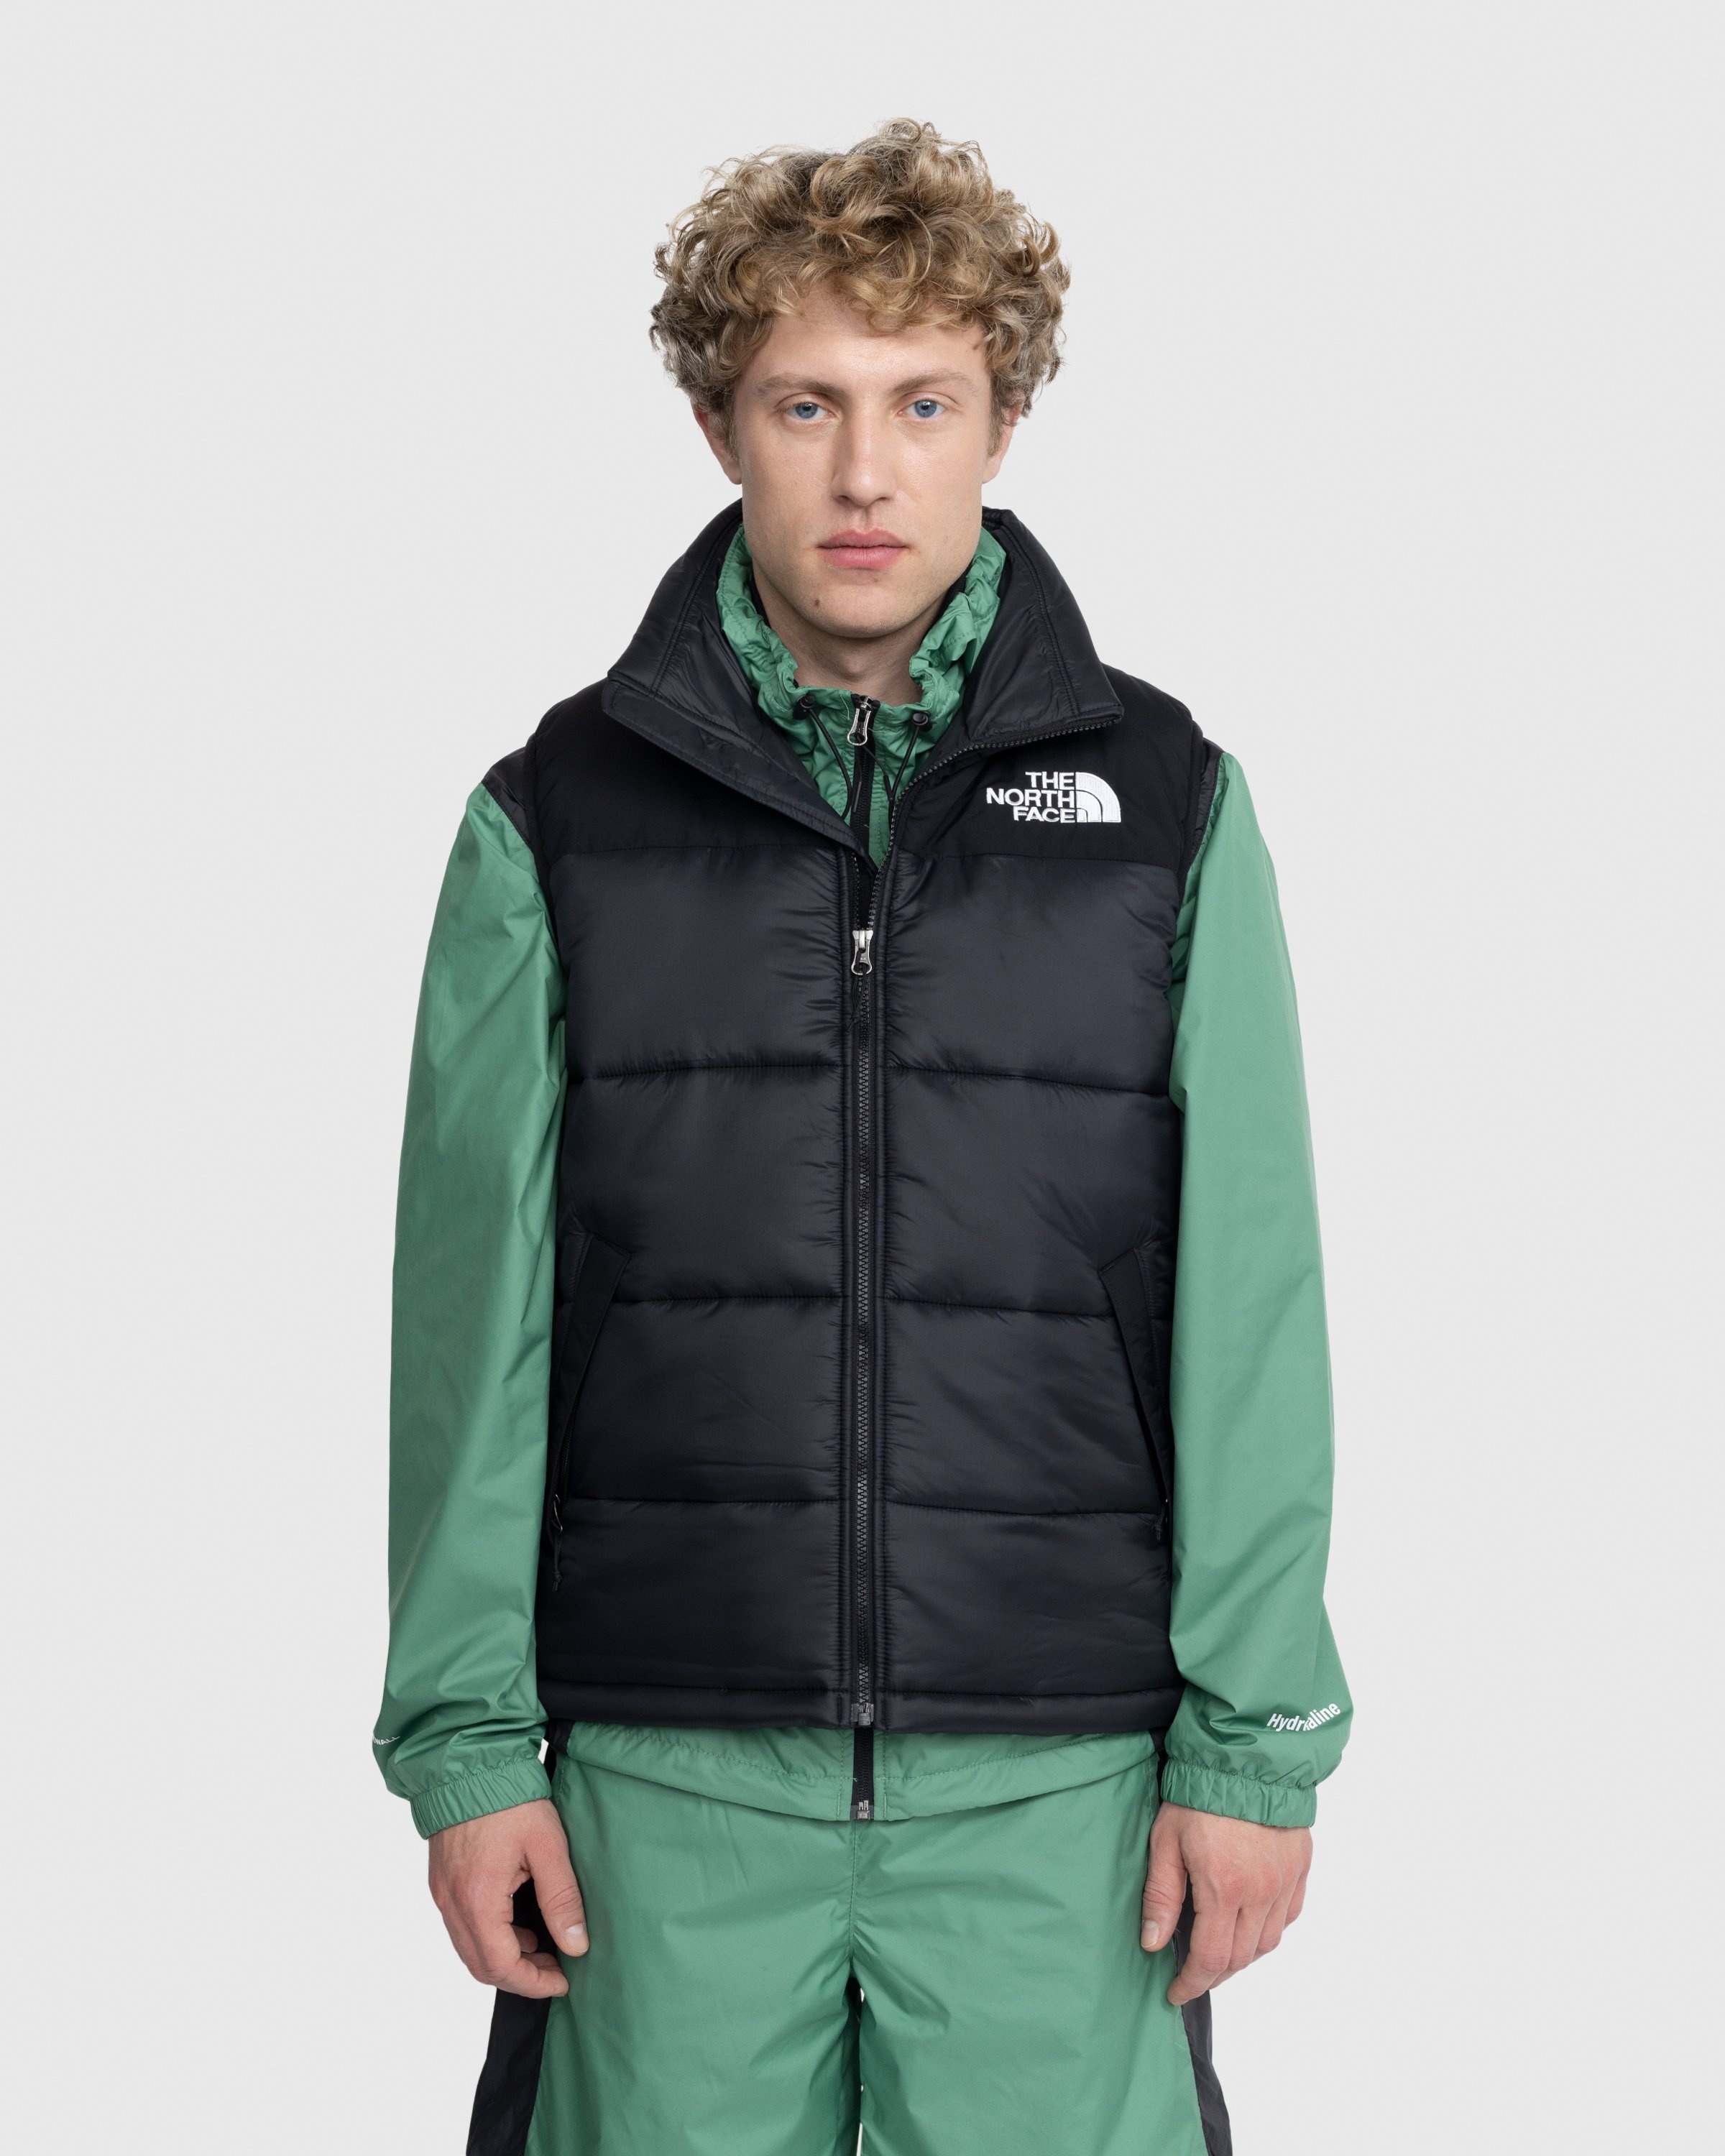 The North Face – Himalayan Synth Vest TNF Black - Outerwear - Black - Image 2